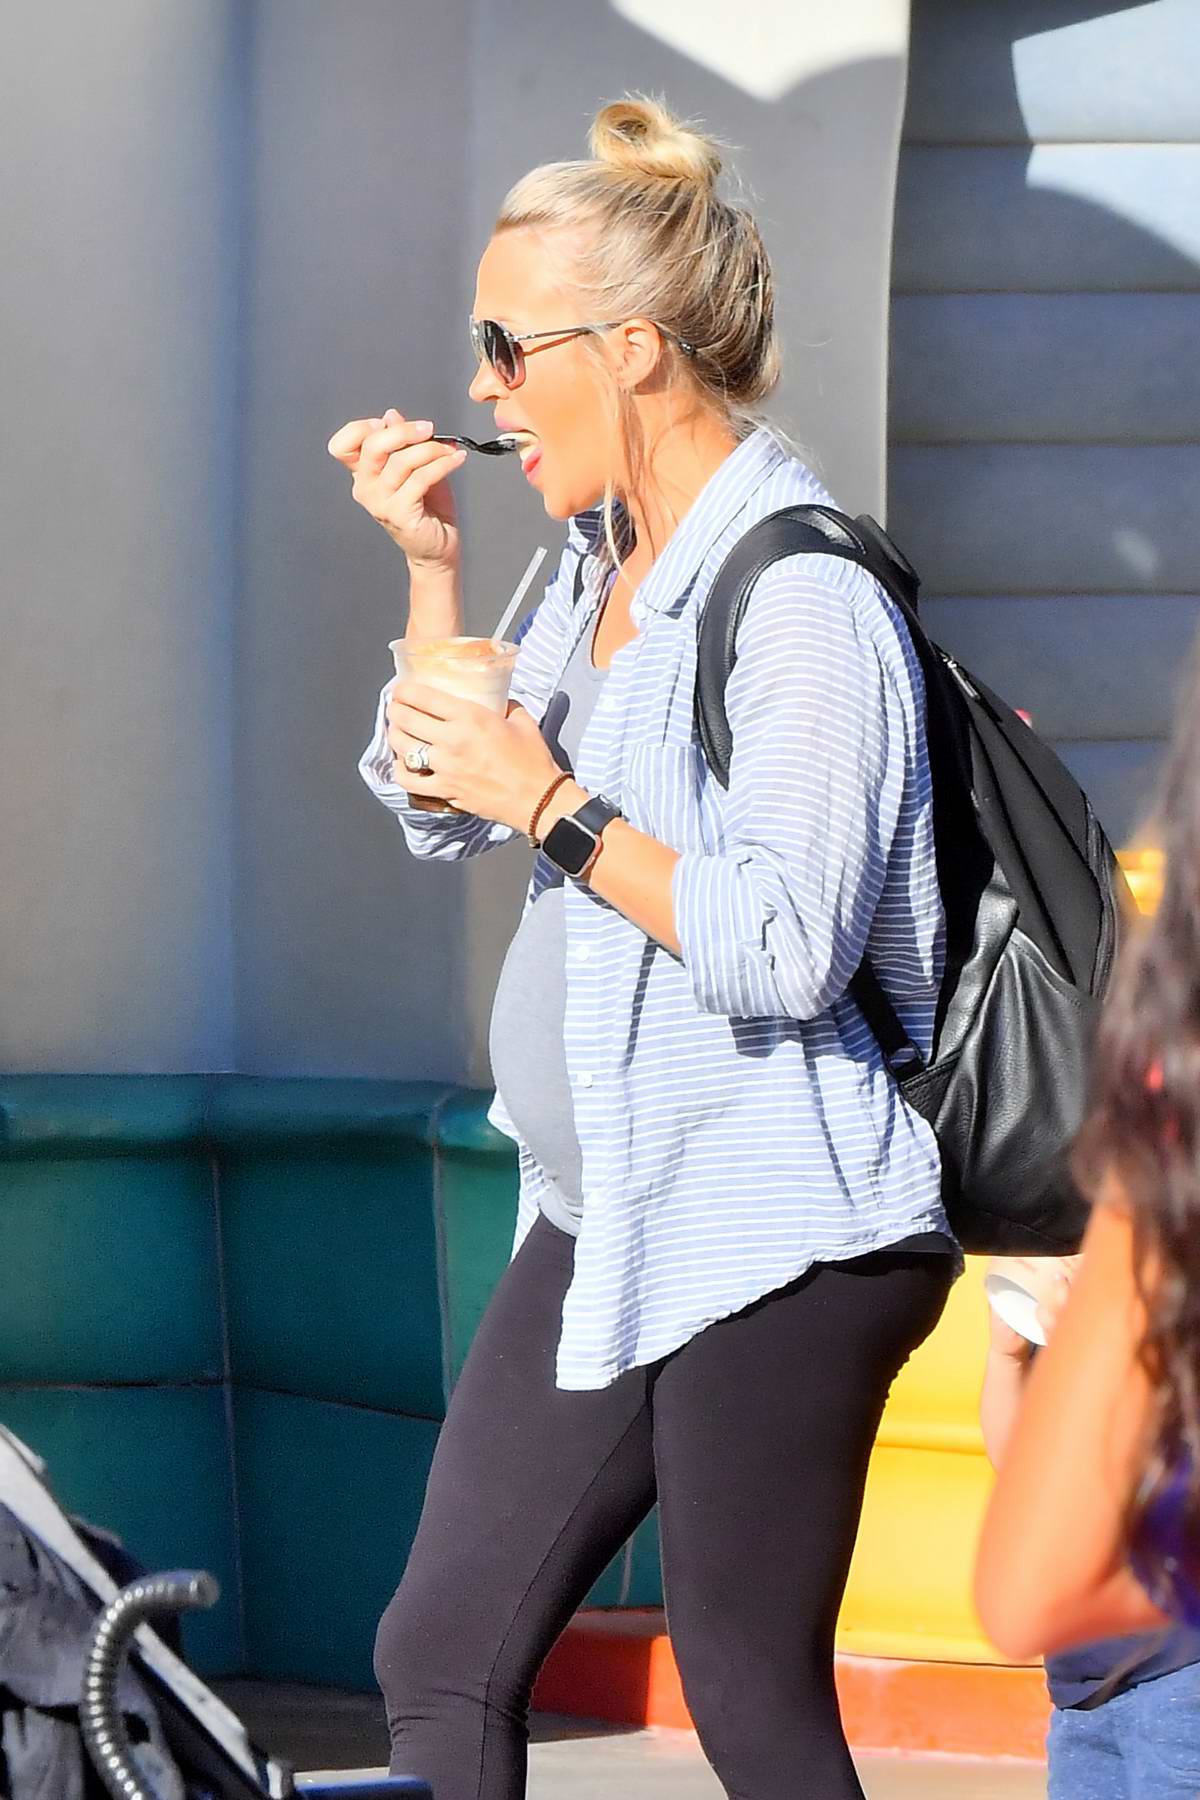 https://www.celebsfirst.com/wp-content/uploads/2018/09/carrie-underwood-spends-a-day-with-her-family-at-disneyland-in-anaheim-california-160918_1.jpg